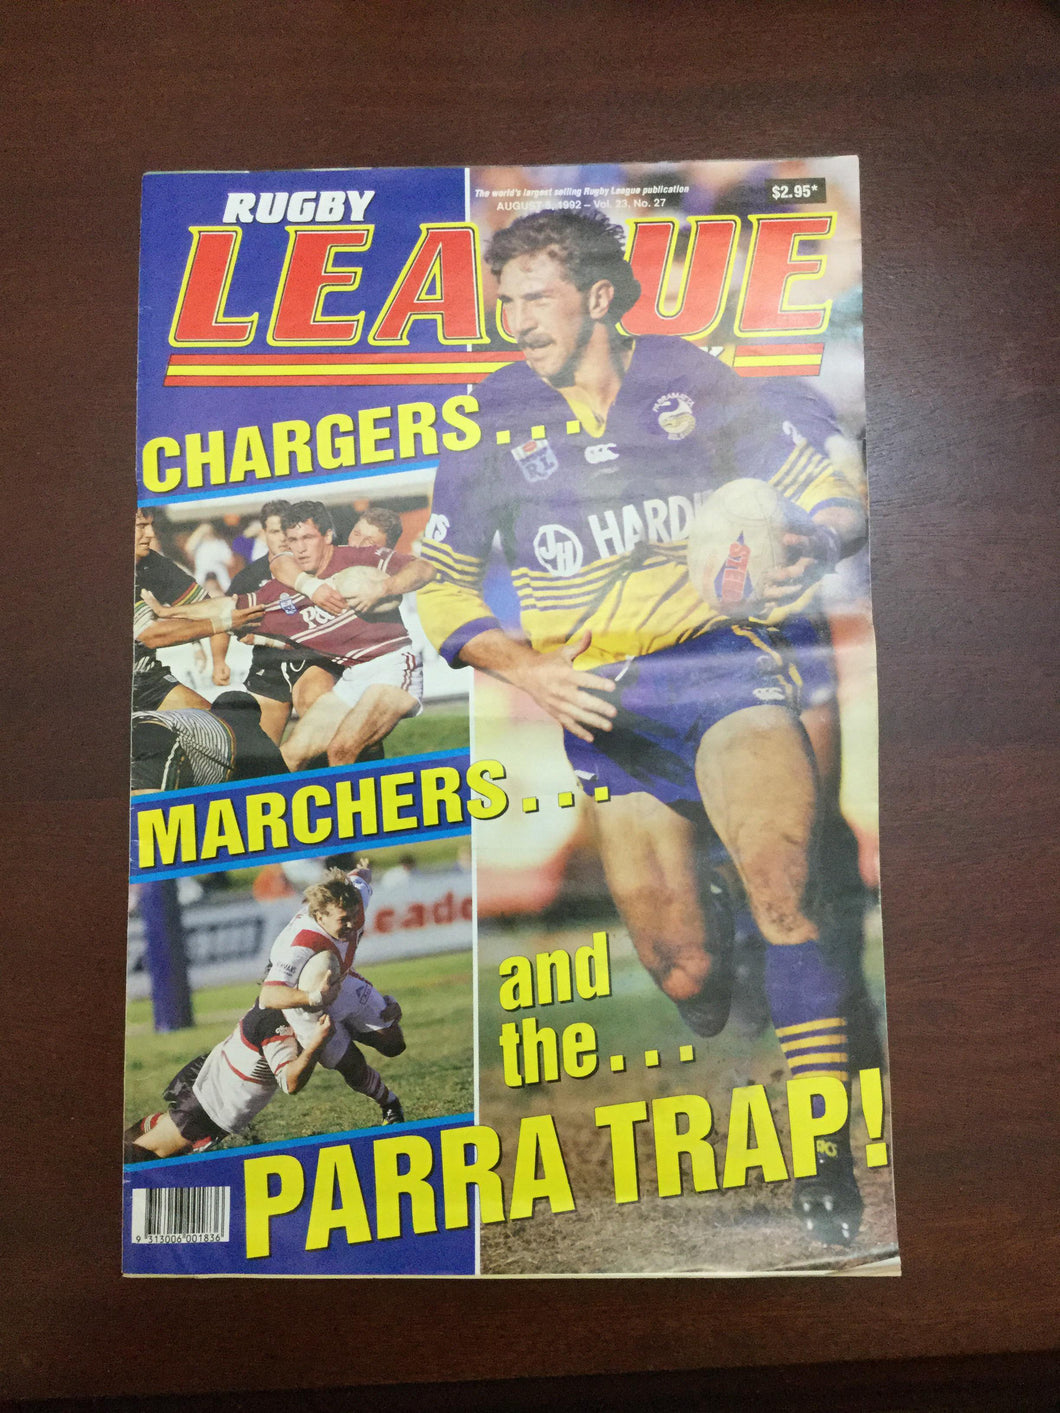 1992 Rugby League Week Magazine August 5 1992 - Vol 23 No. 27